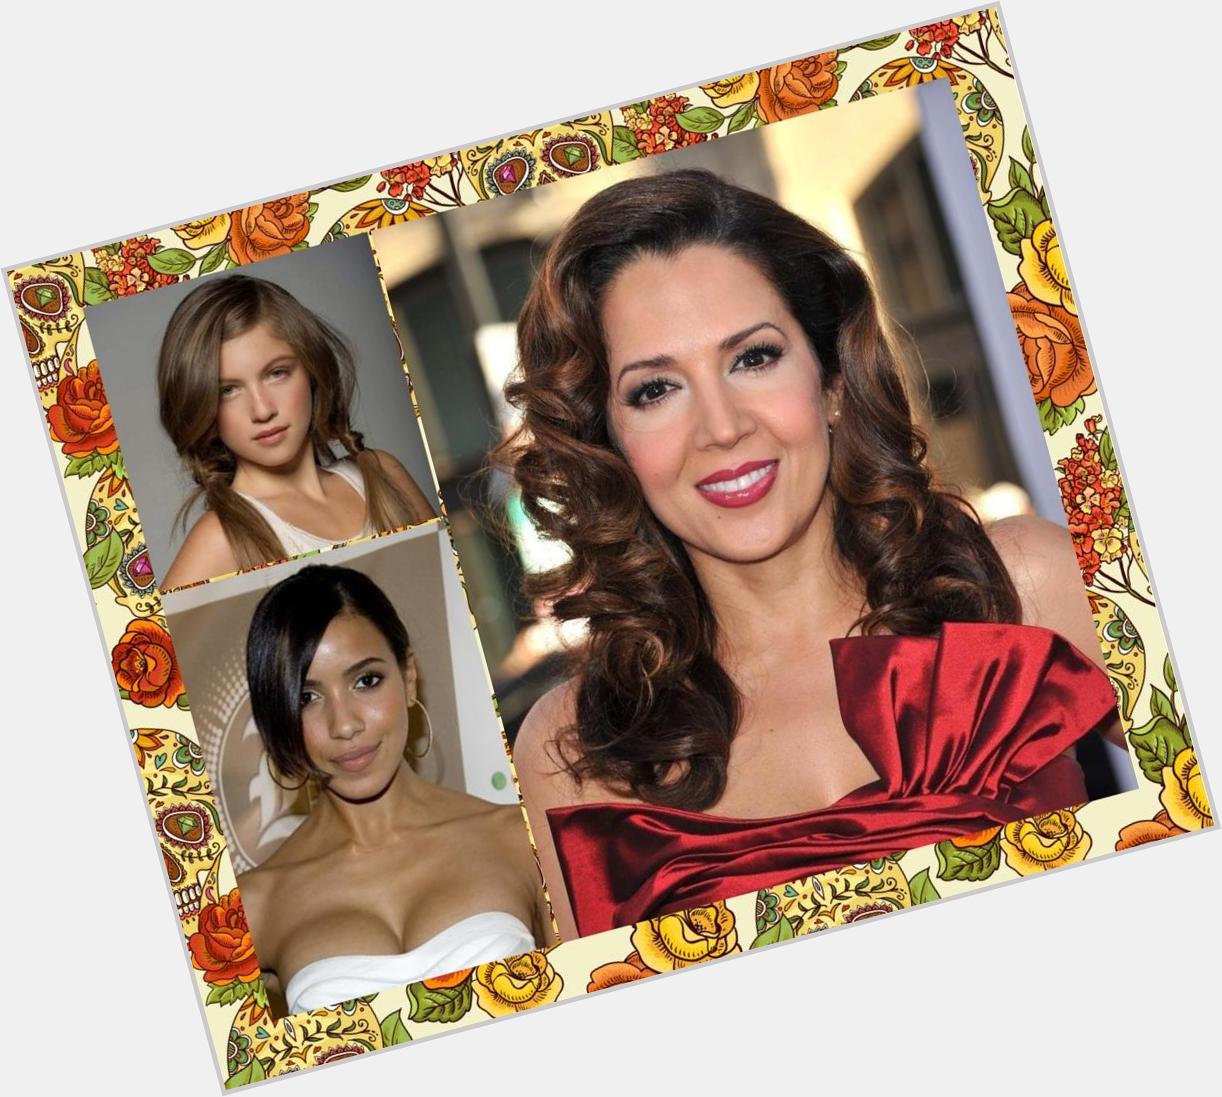  wishes Maria Canals Barrera, Julissa Bermudez, and Isidora Vives, a very happy birthday 